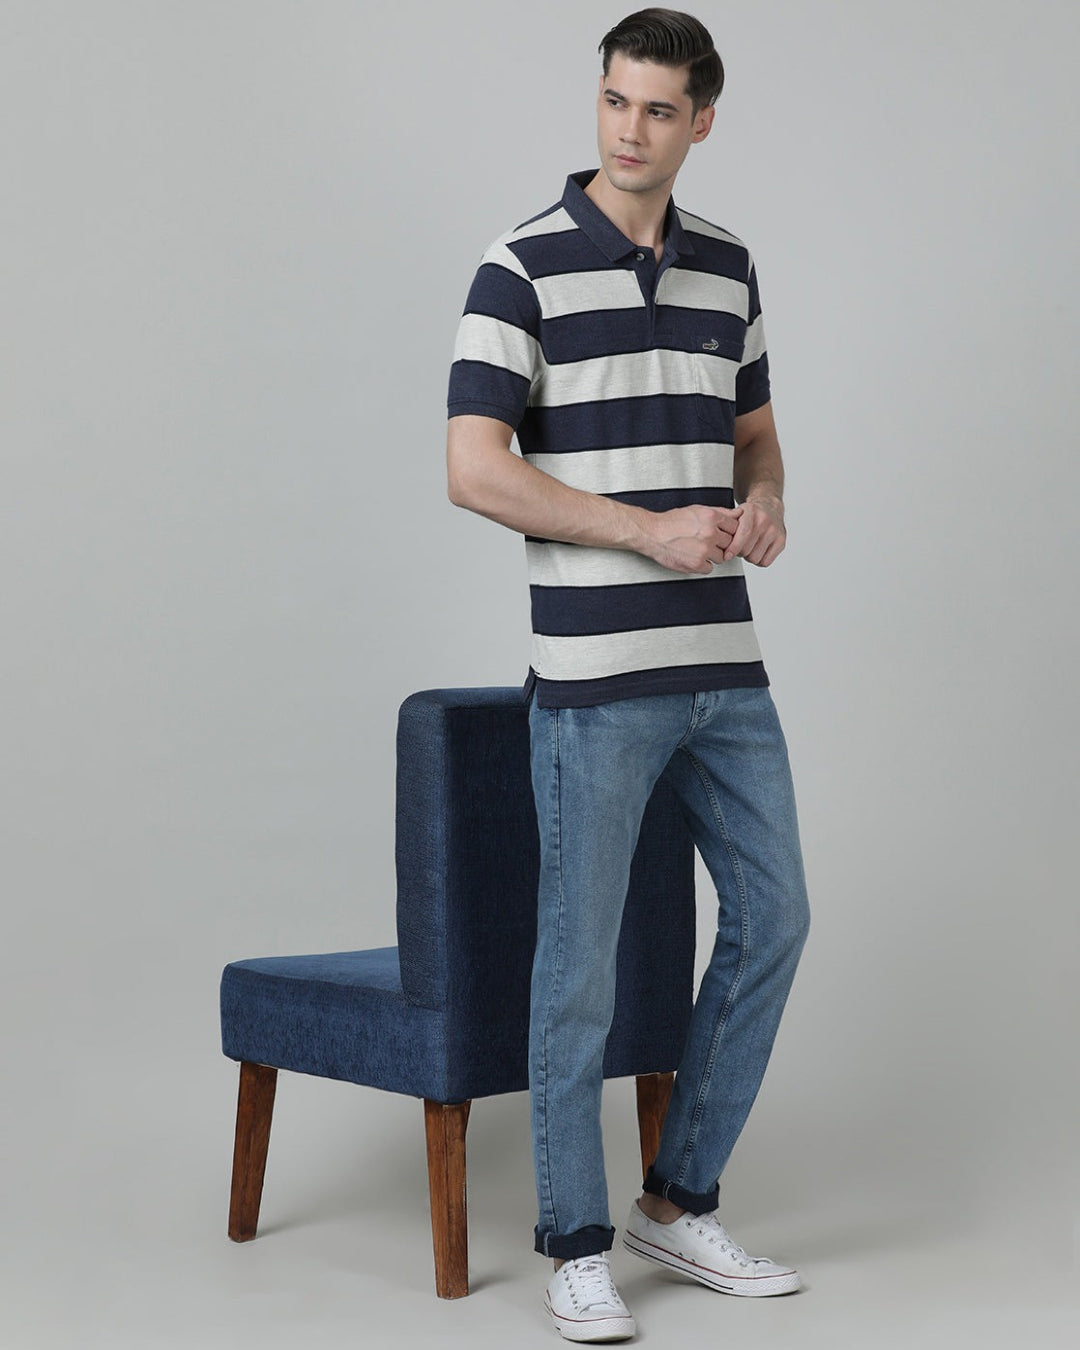 Casual Stripes Slim Fit Half Sleeve Navy Polo T-shirt with Collar